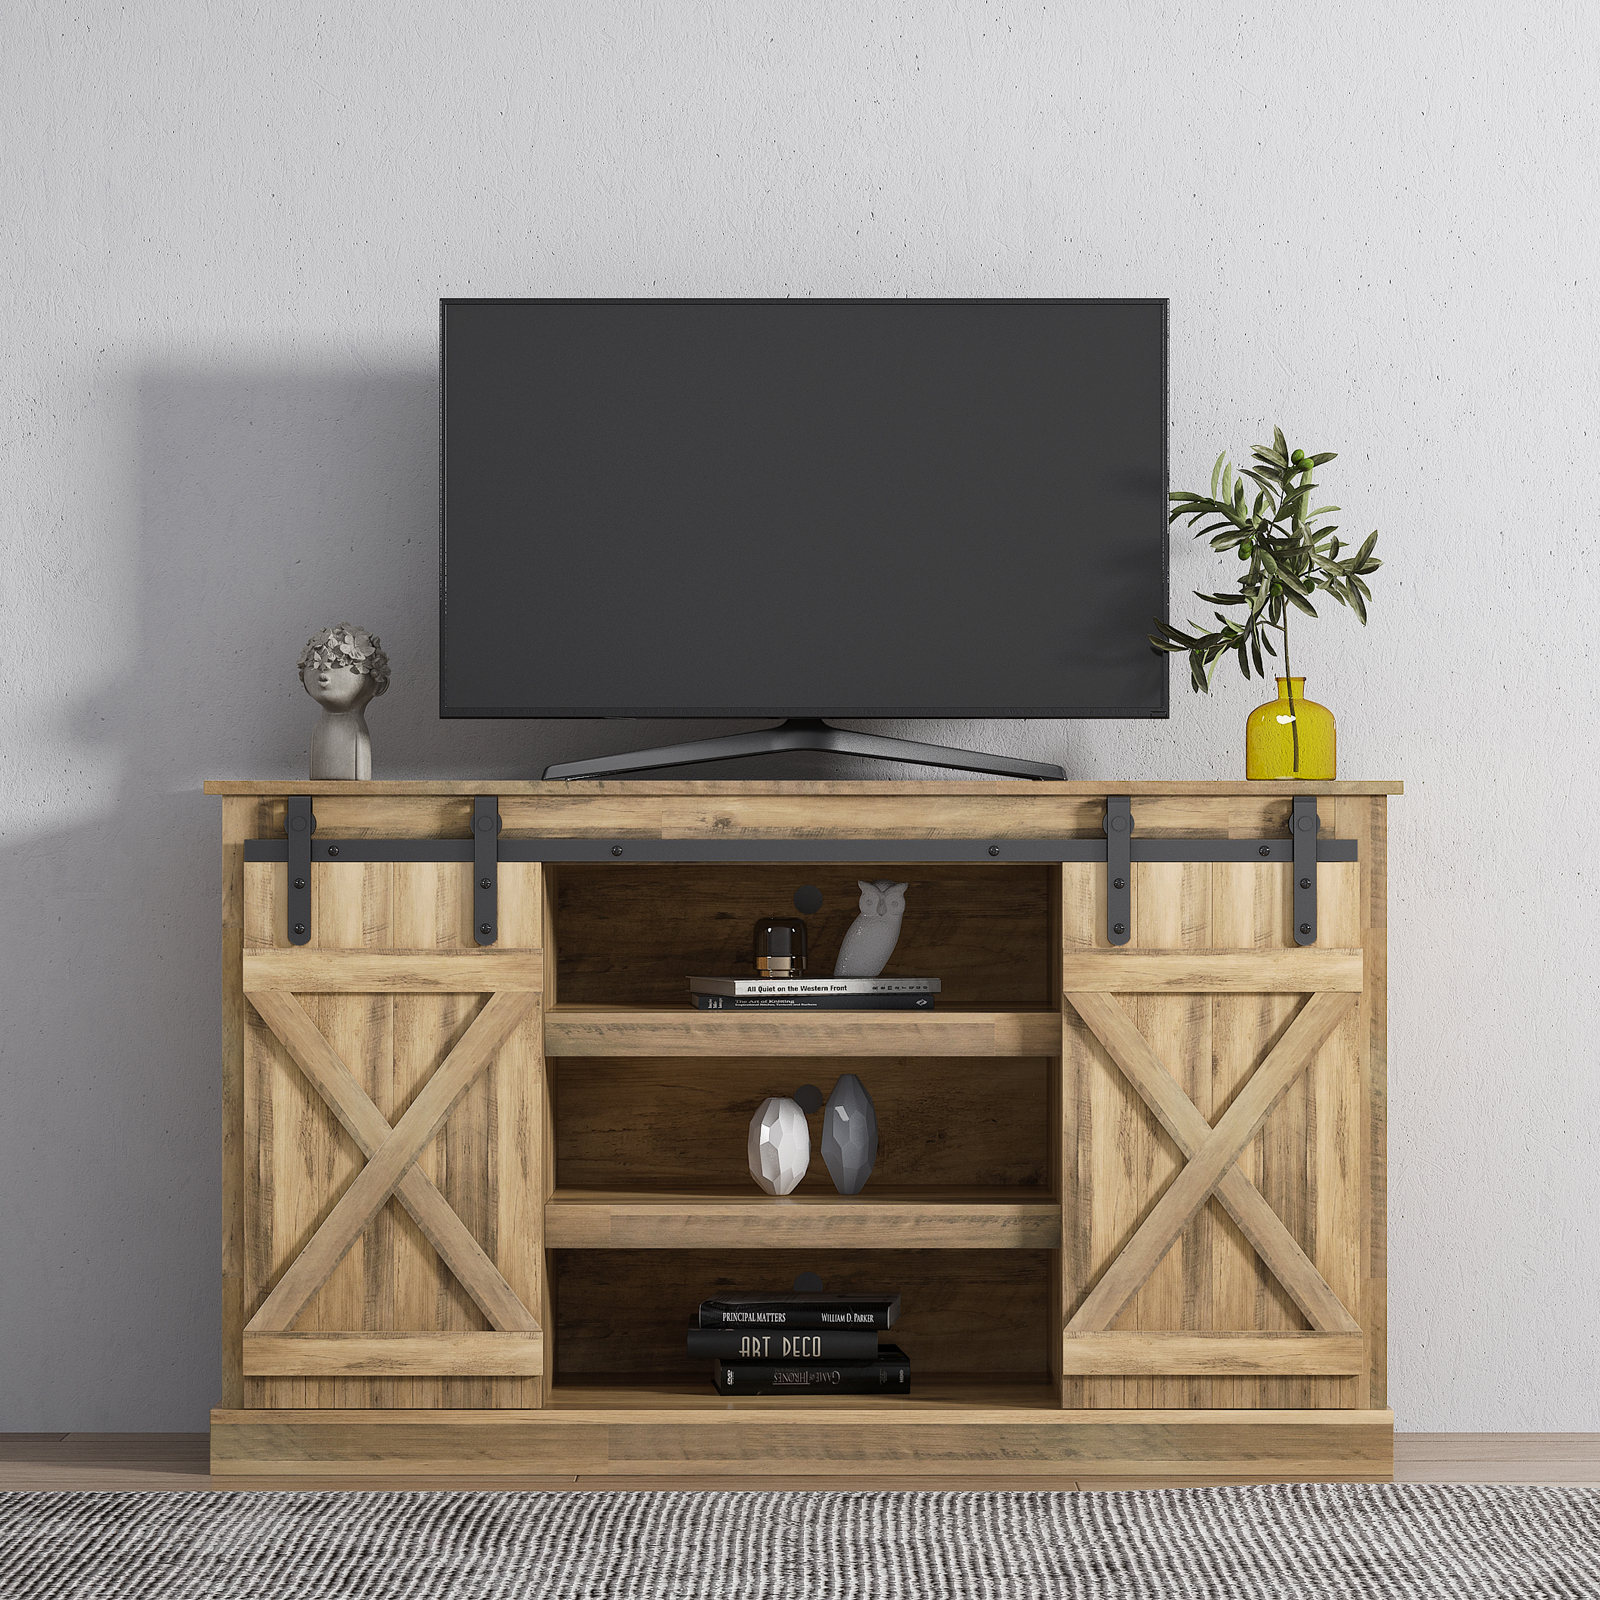 Details about   TV Stand Wood Media Storage Console 65 Inch TV Flat Screen TV Cabinet Consoles W 